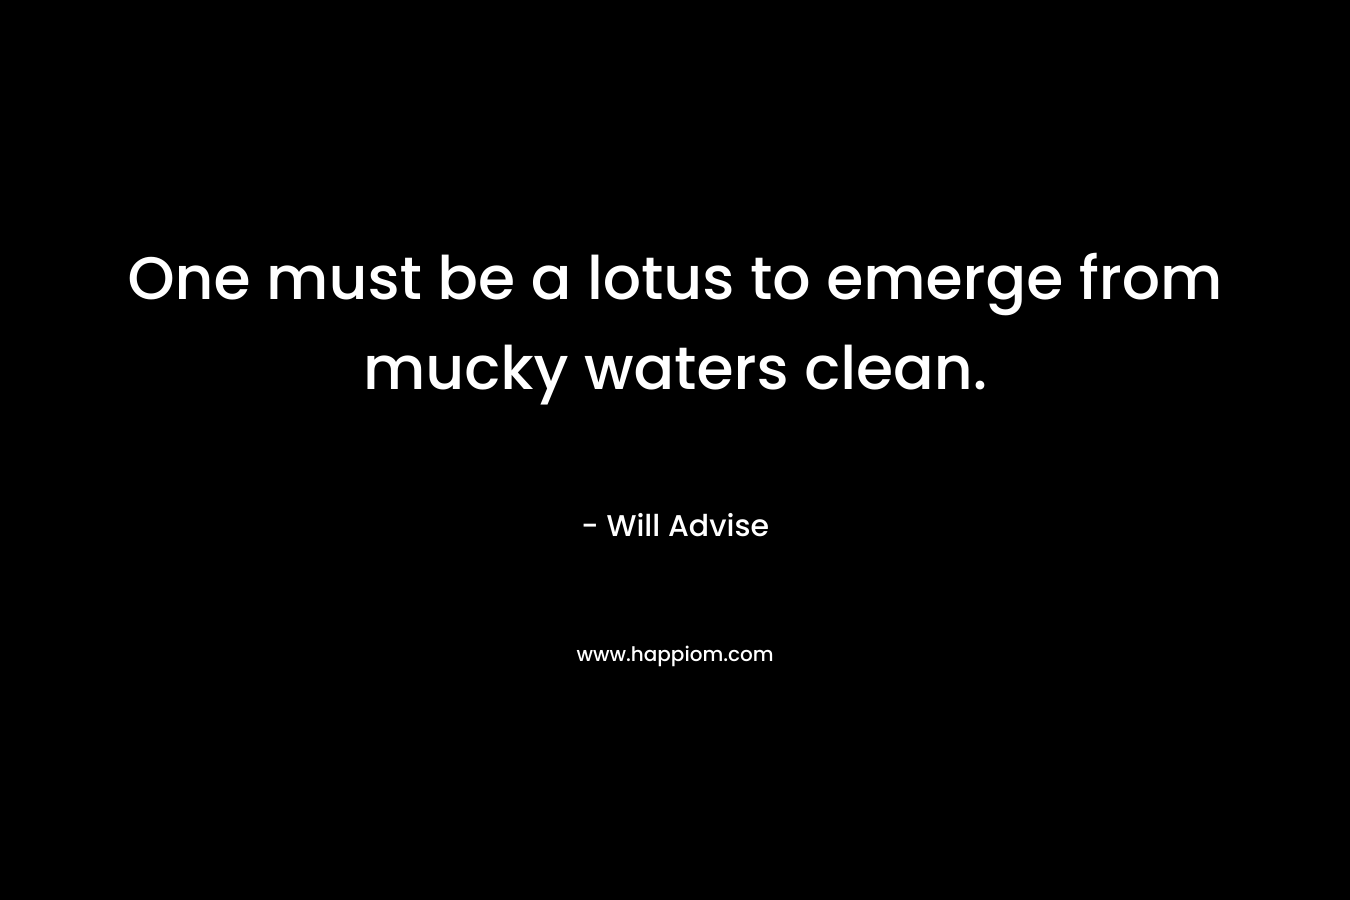 One must be a lotus to emerge from mucky waters clean. – Will Advise